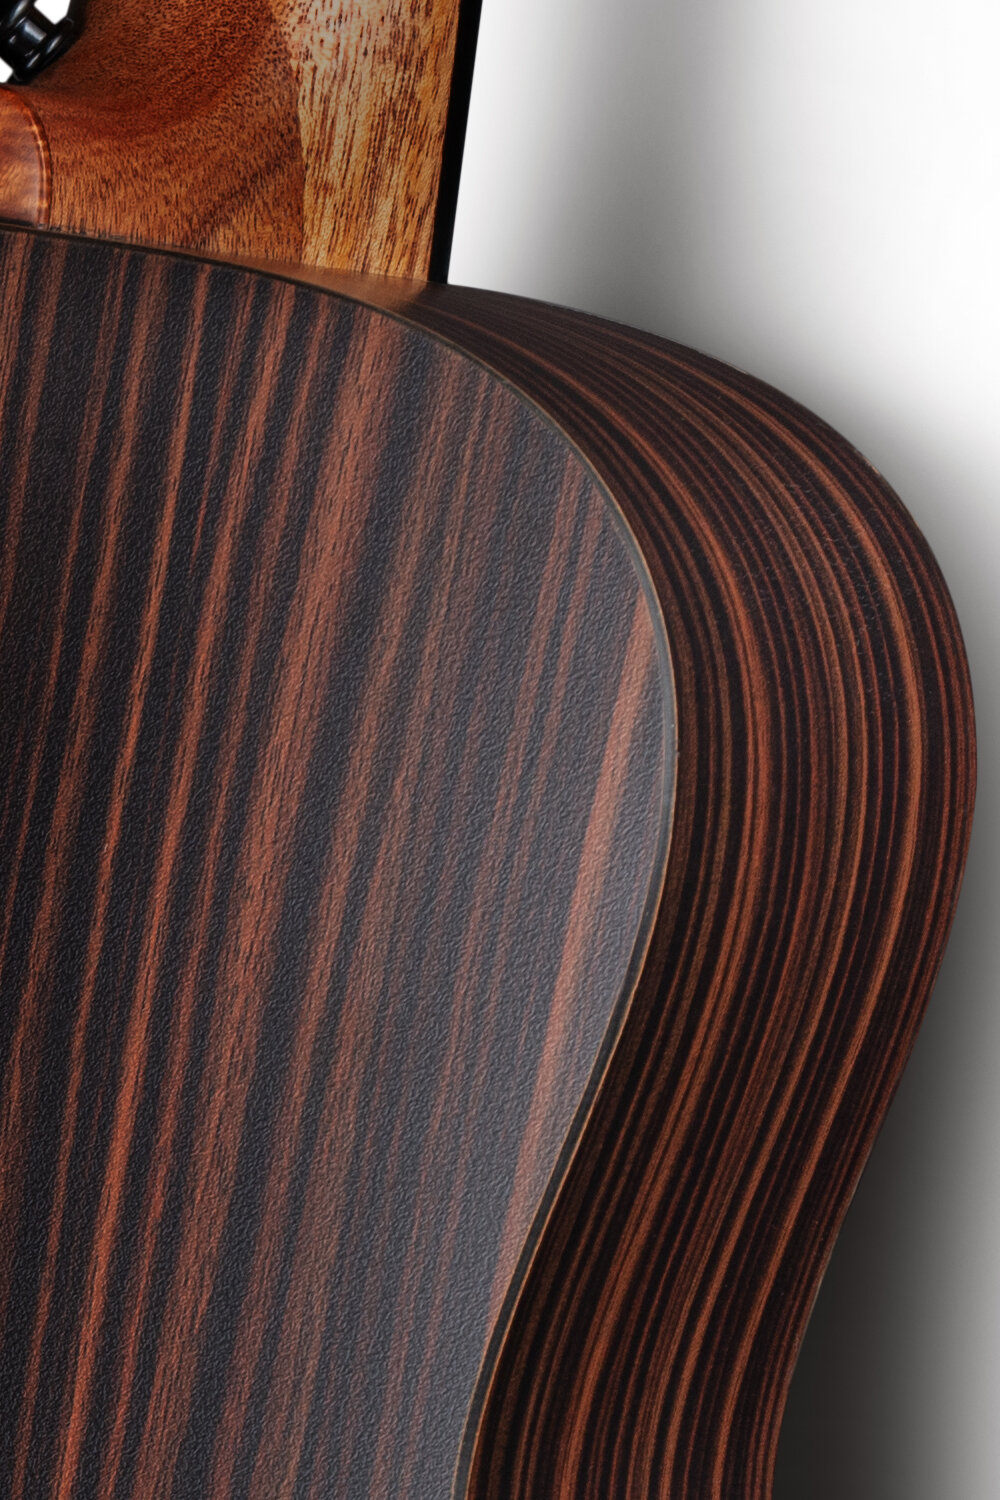 HPL back and sides - X1 Pro uses the newly developed rosewood HPL back and sides, which look lovely, and X1 PRO uses the over 10-year-old air dried plateau spruce top!Making the X1 Pro's sound more distinctive!